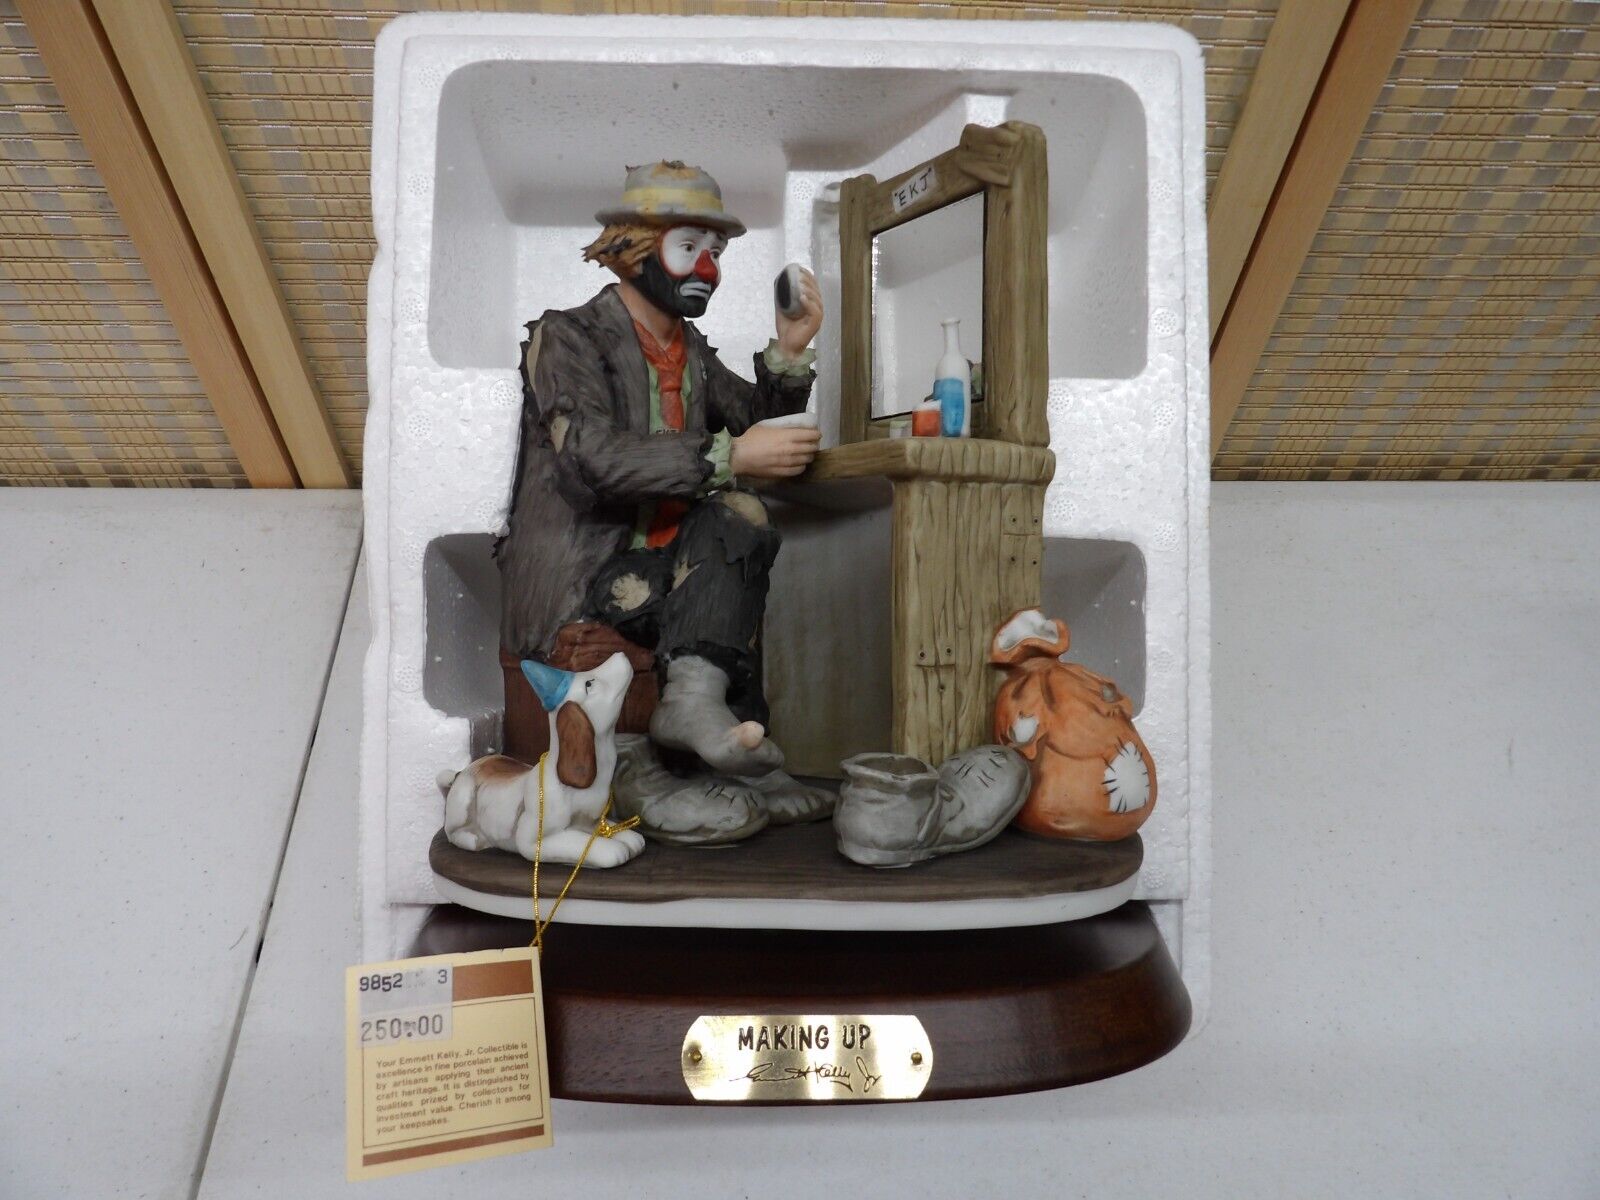 The Emmett Kelly Jr. Signature Collection - 9852 - Making Up - Signed/Autograph